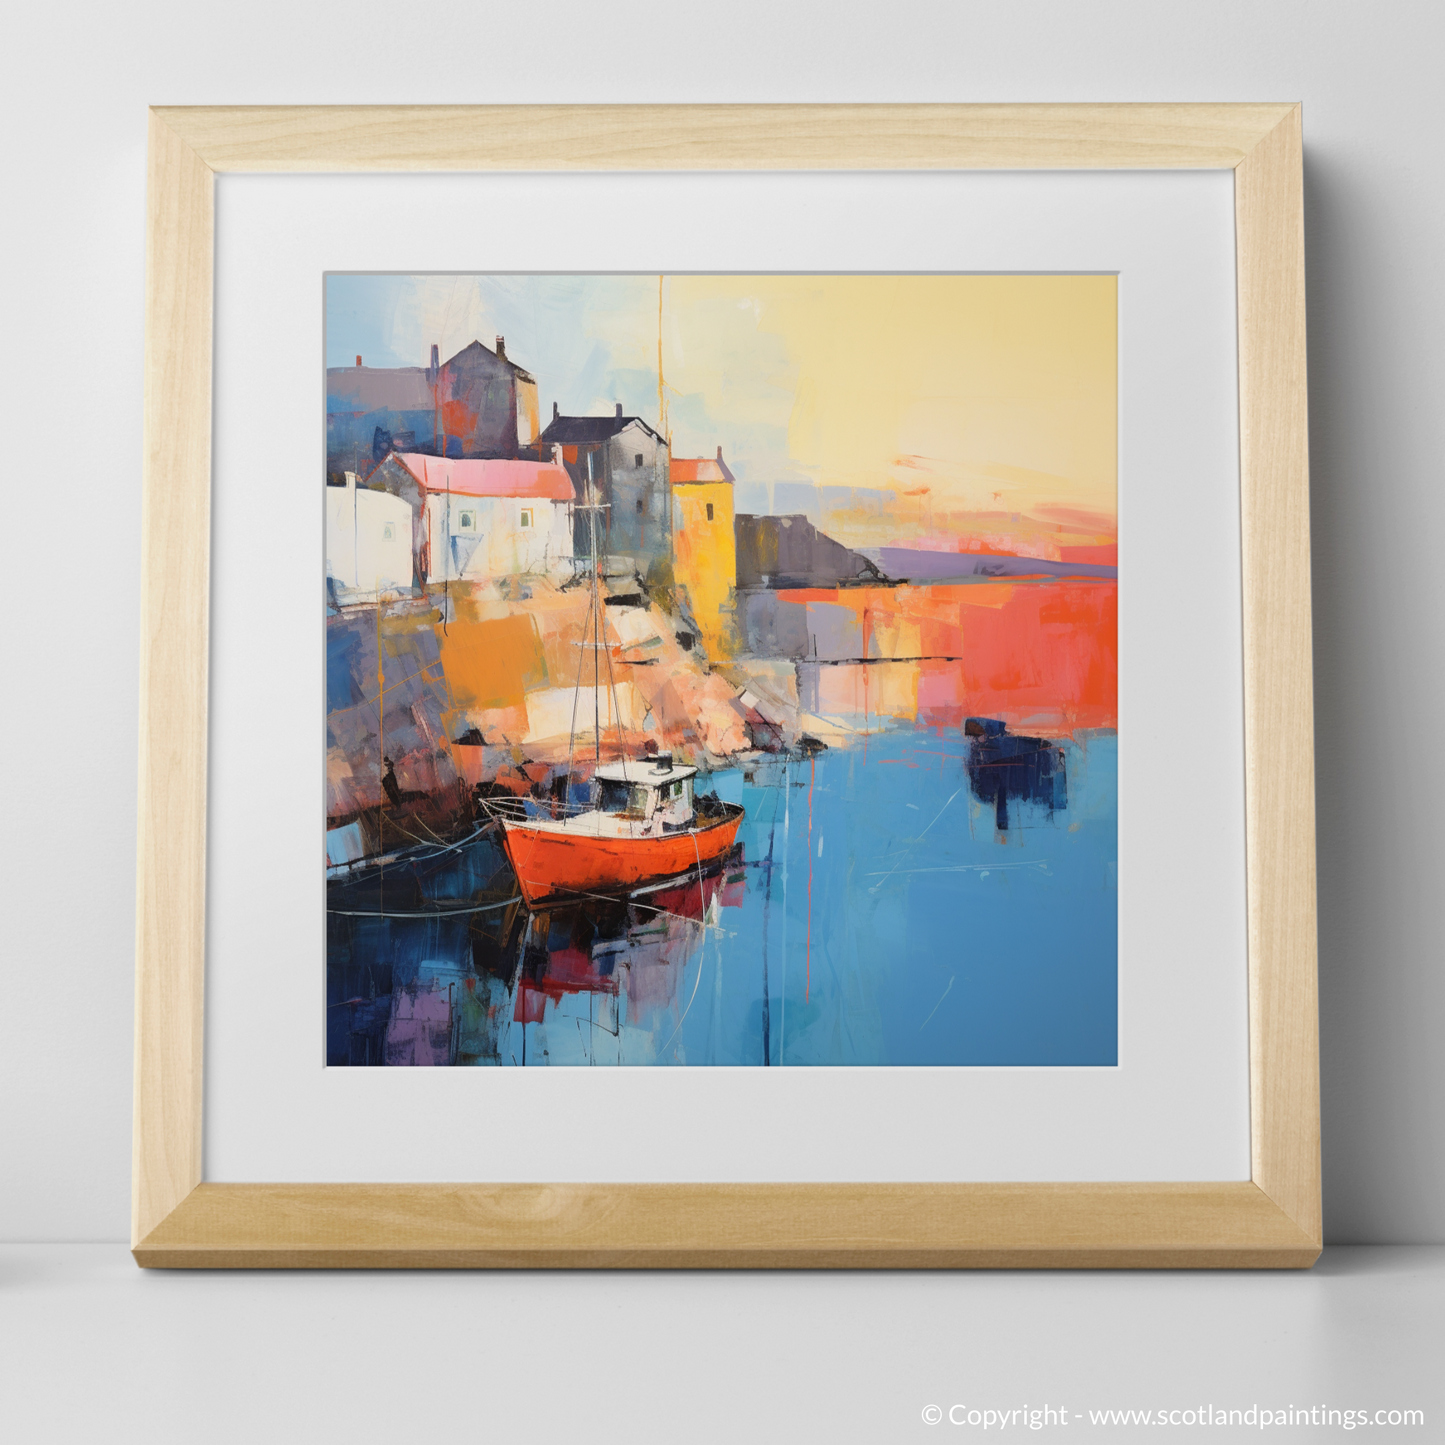 Golden Hour at Dunbar Harbour: An Abstract Ode to Scotland's Seascapes